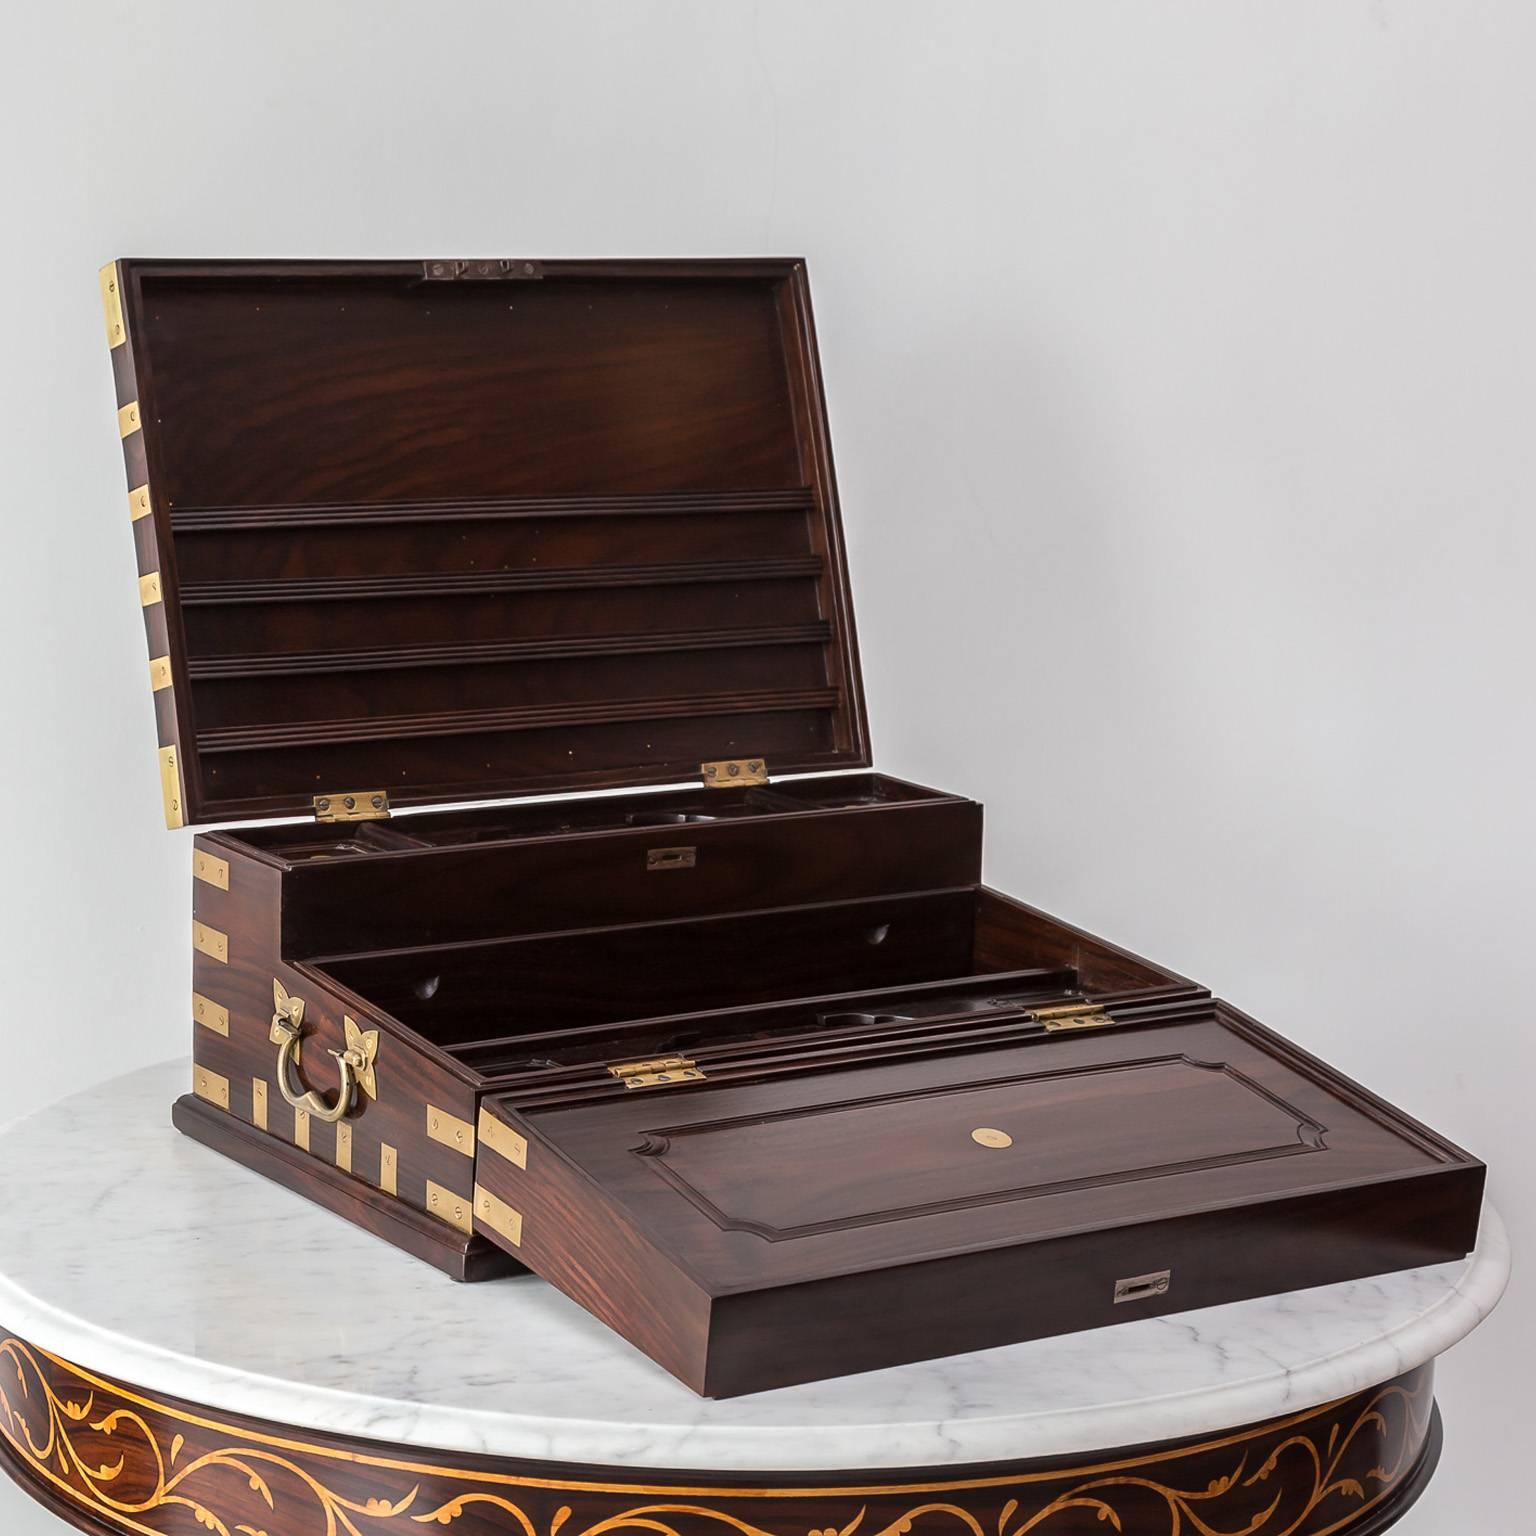 Anglo-Indian or British Colonial Triple Opening Writing Box Mid 19th Century For Sale 3